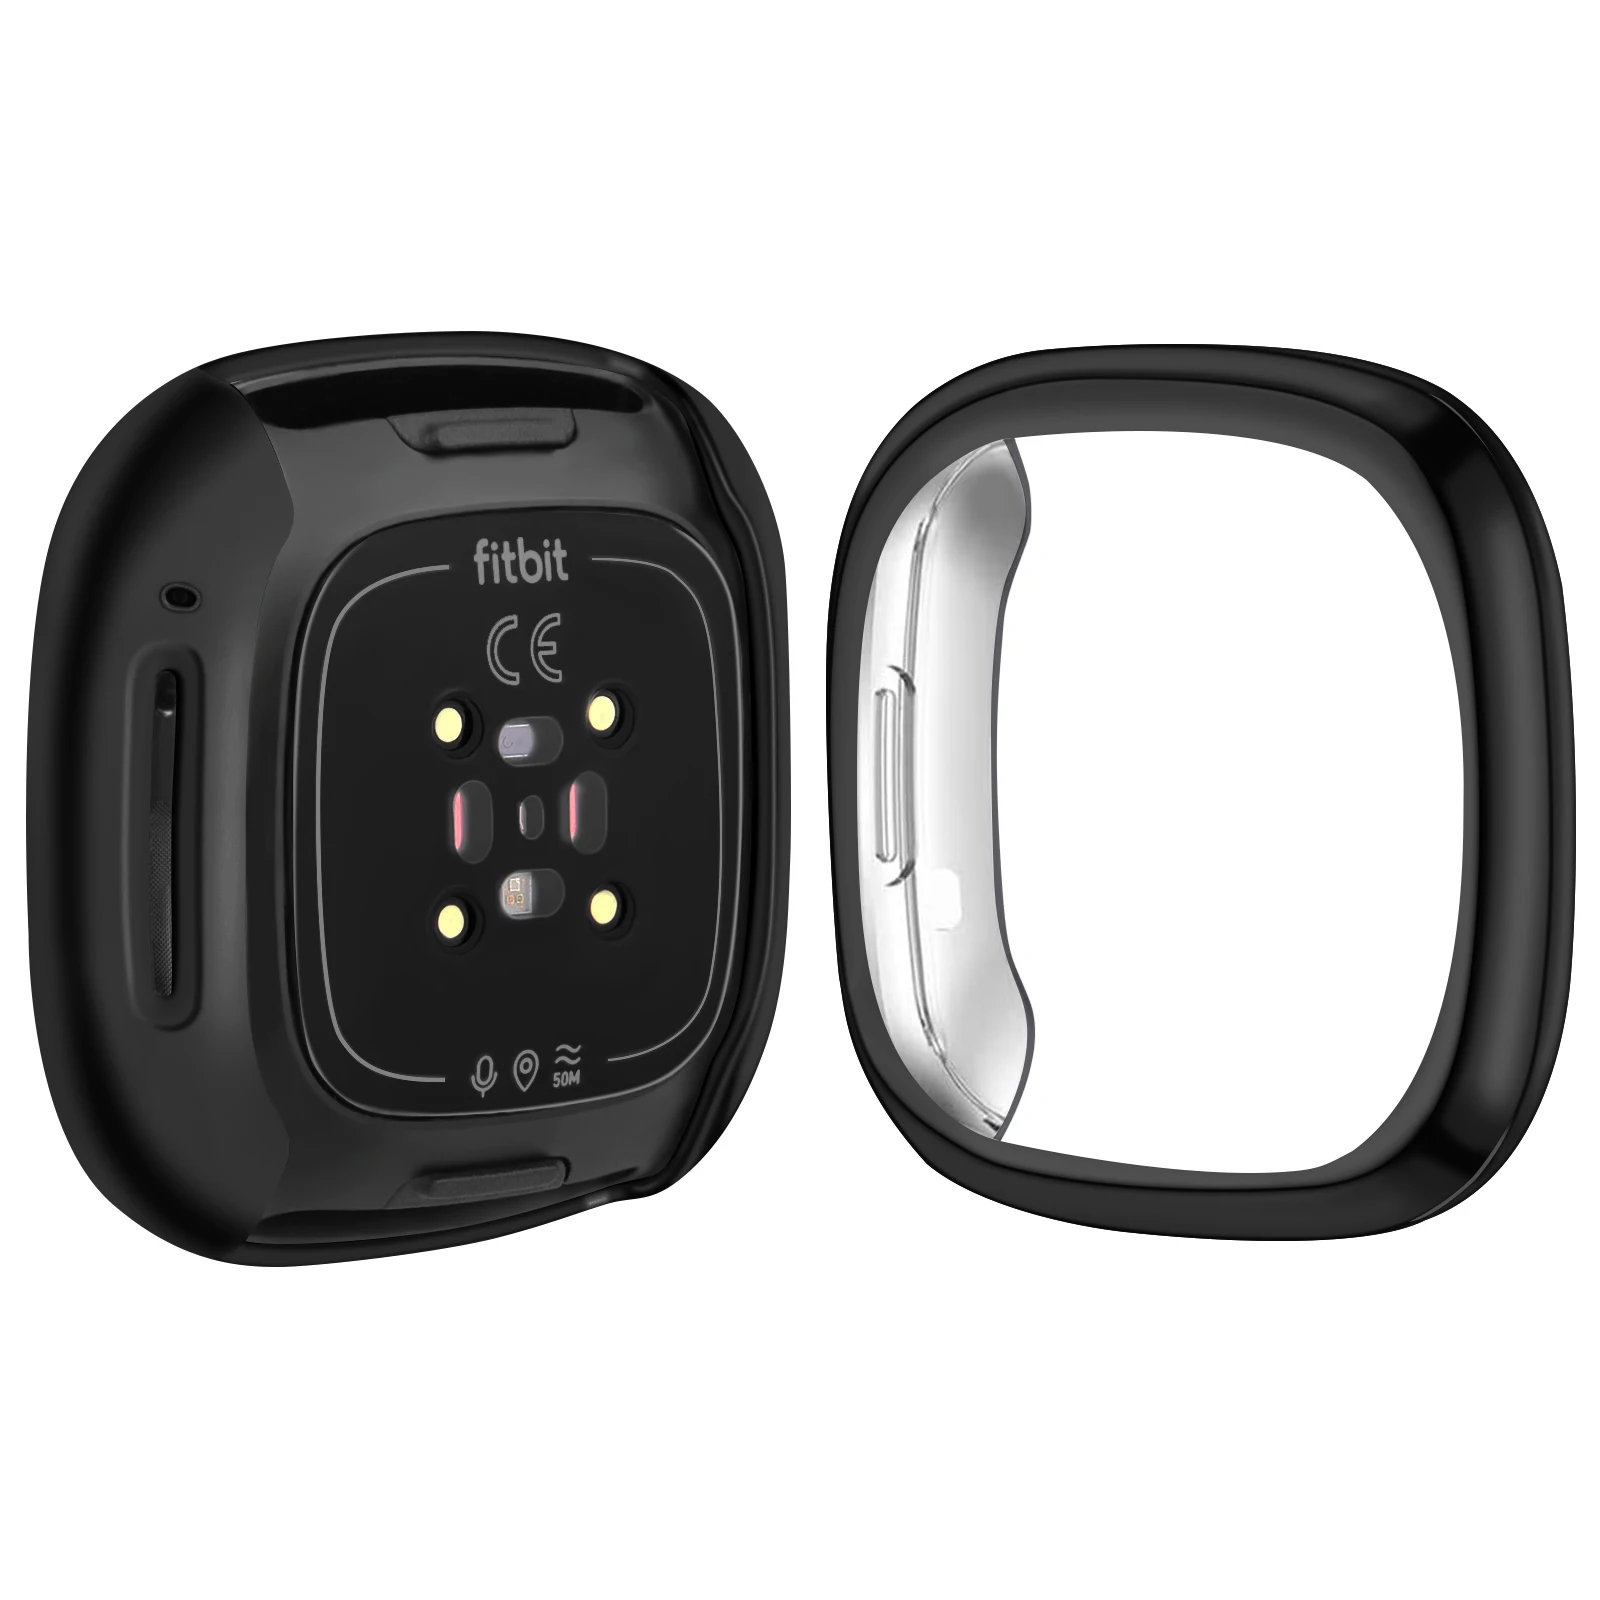 Cover For Fitbit Versa 3 Screen Protector Tpu Protective Case Watch Shell Cover For Versa 2 Sense Waterproof Anti Shock Bumper